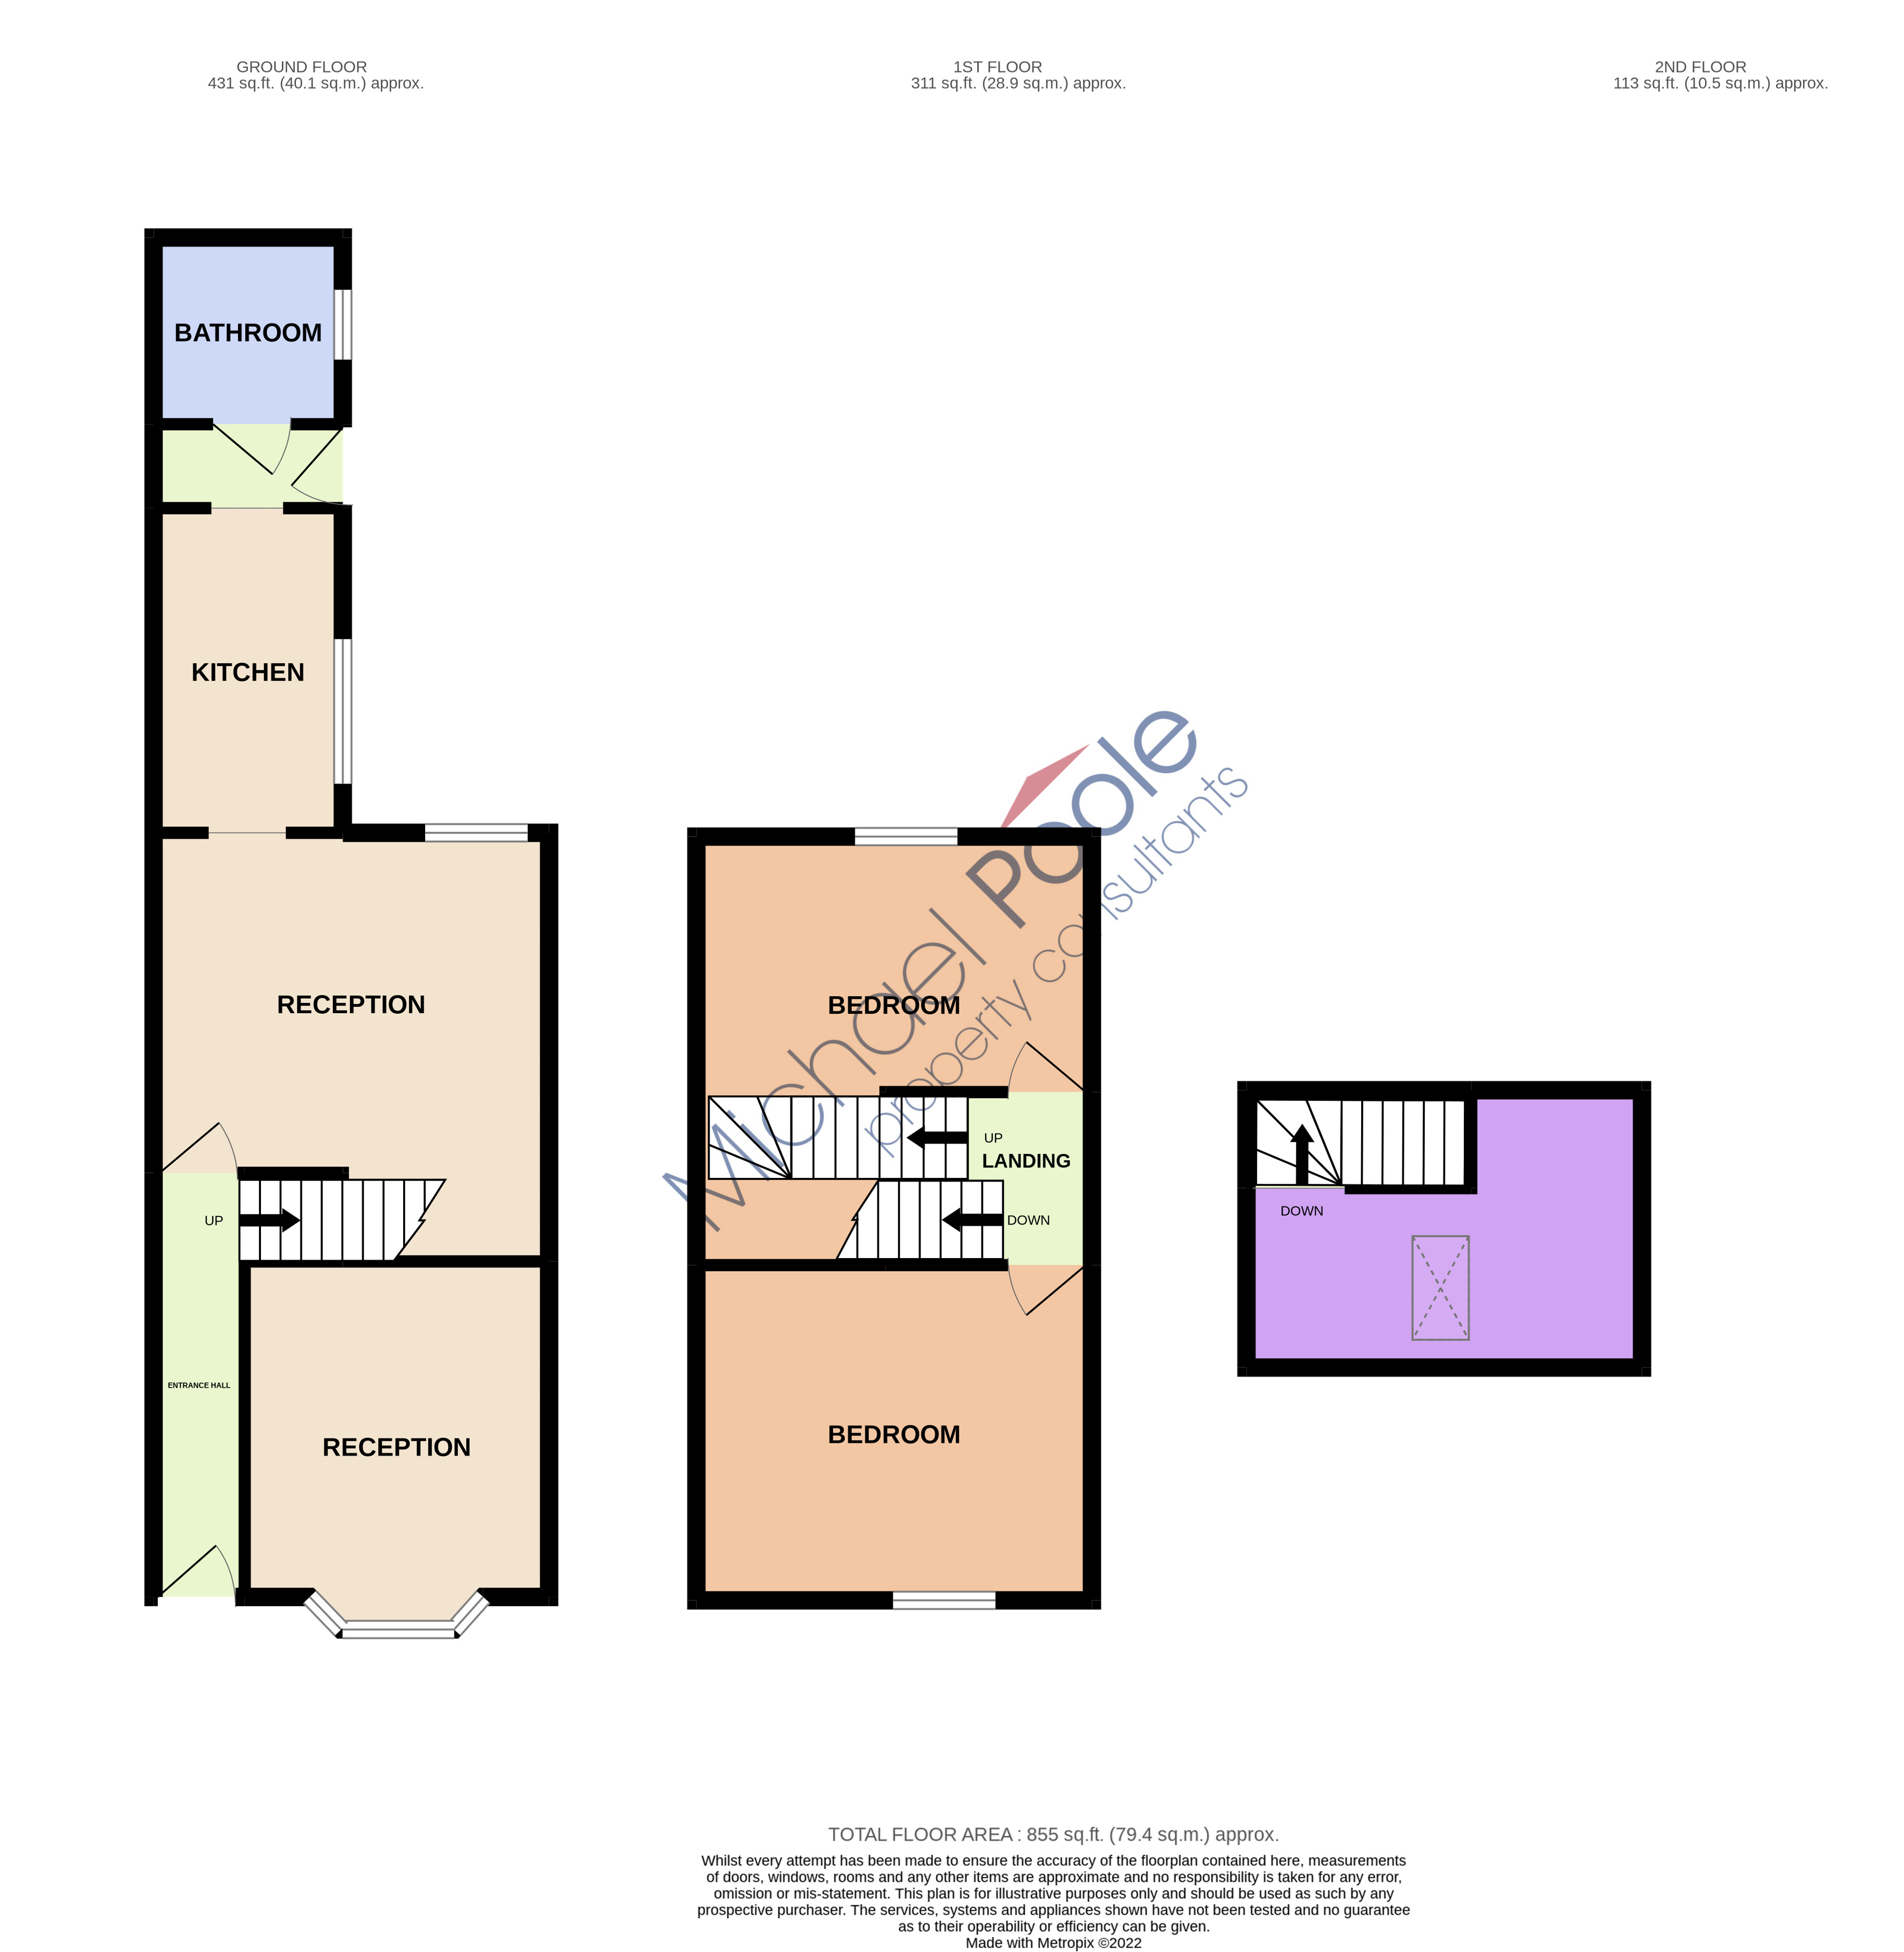 2 bed house for sale - Property floorplan